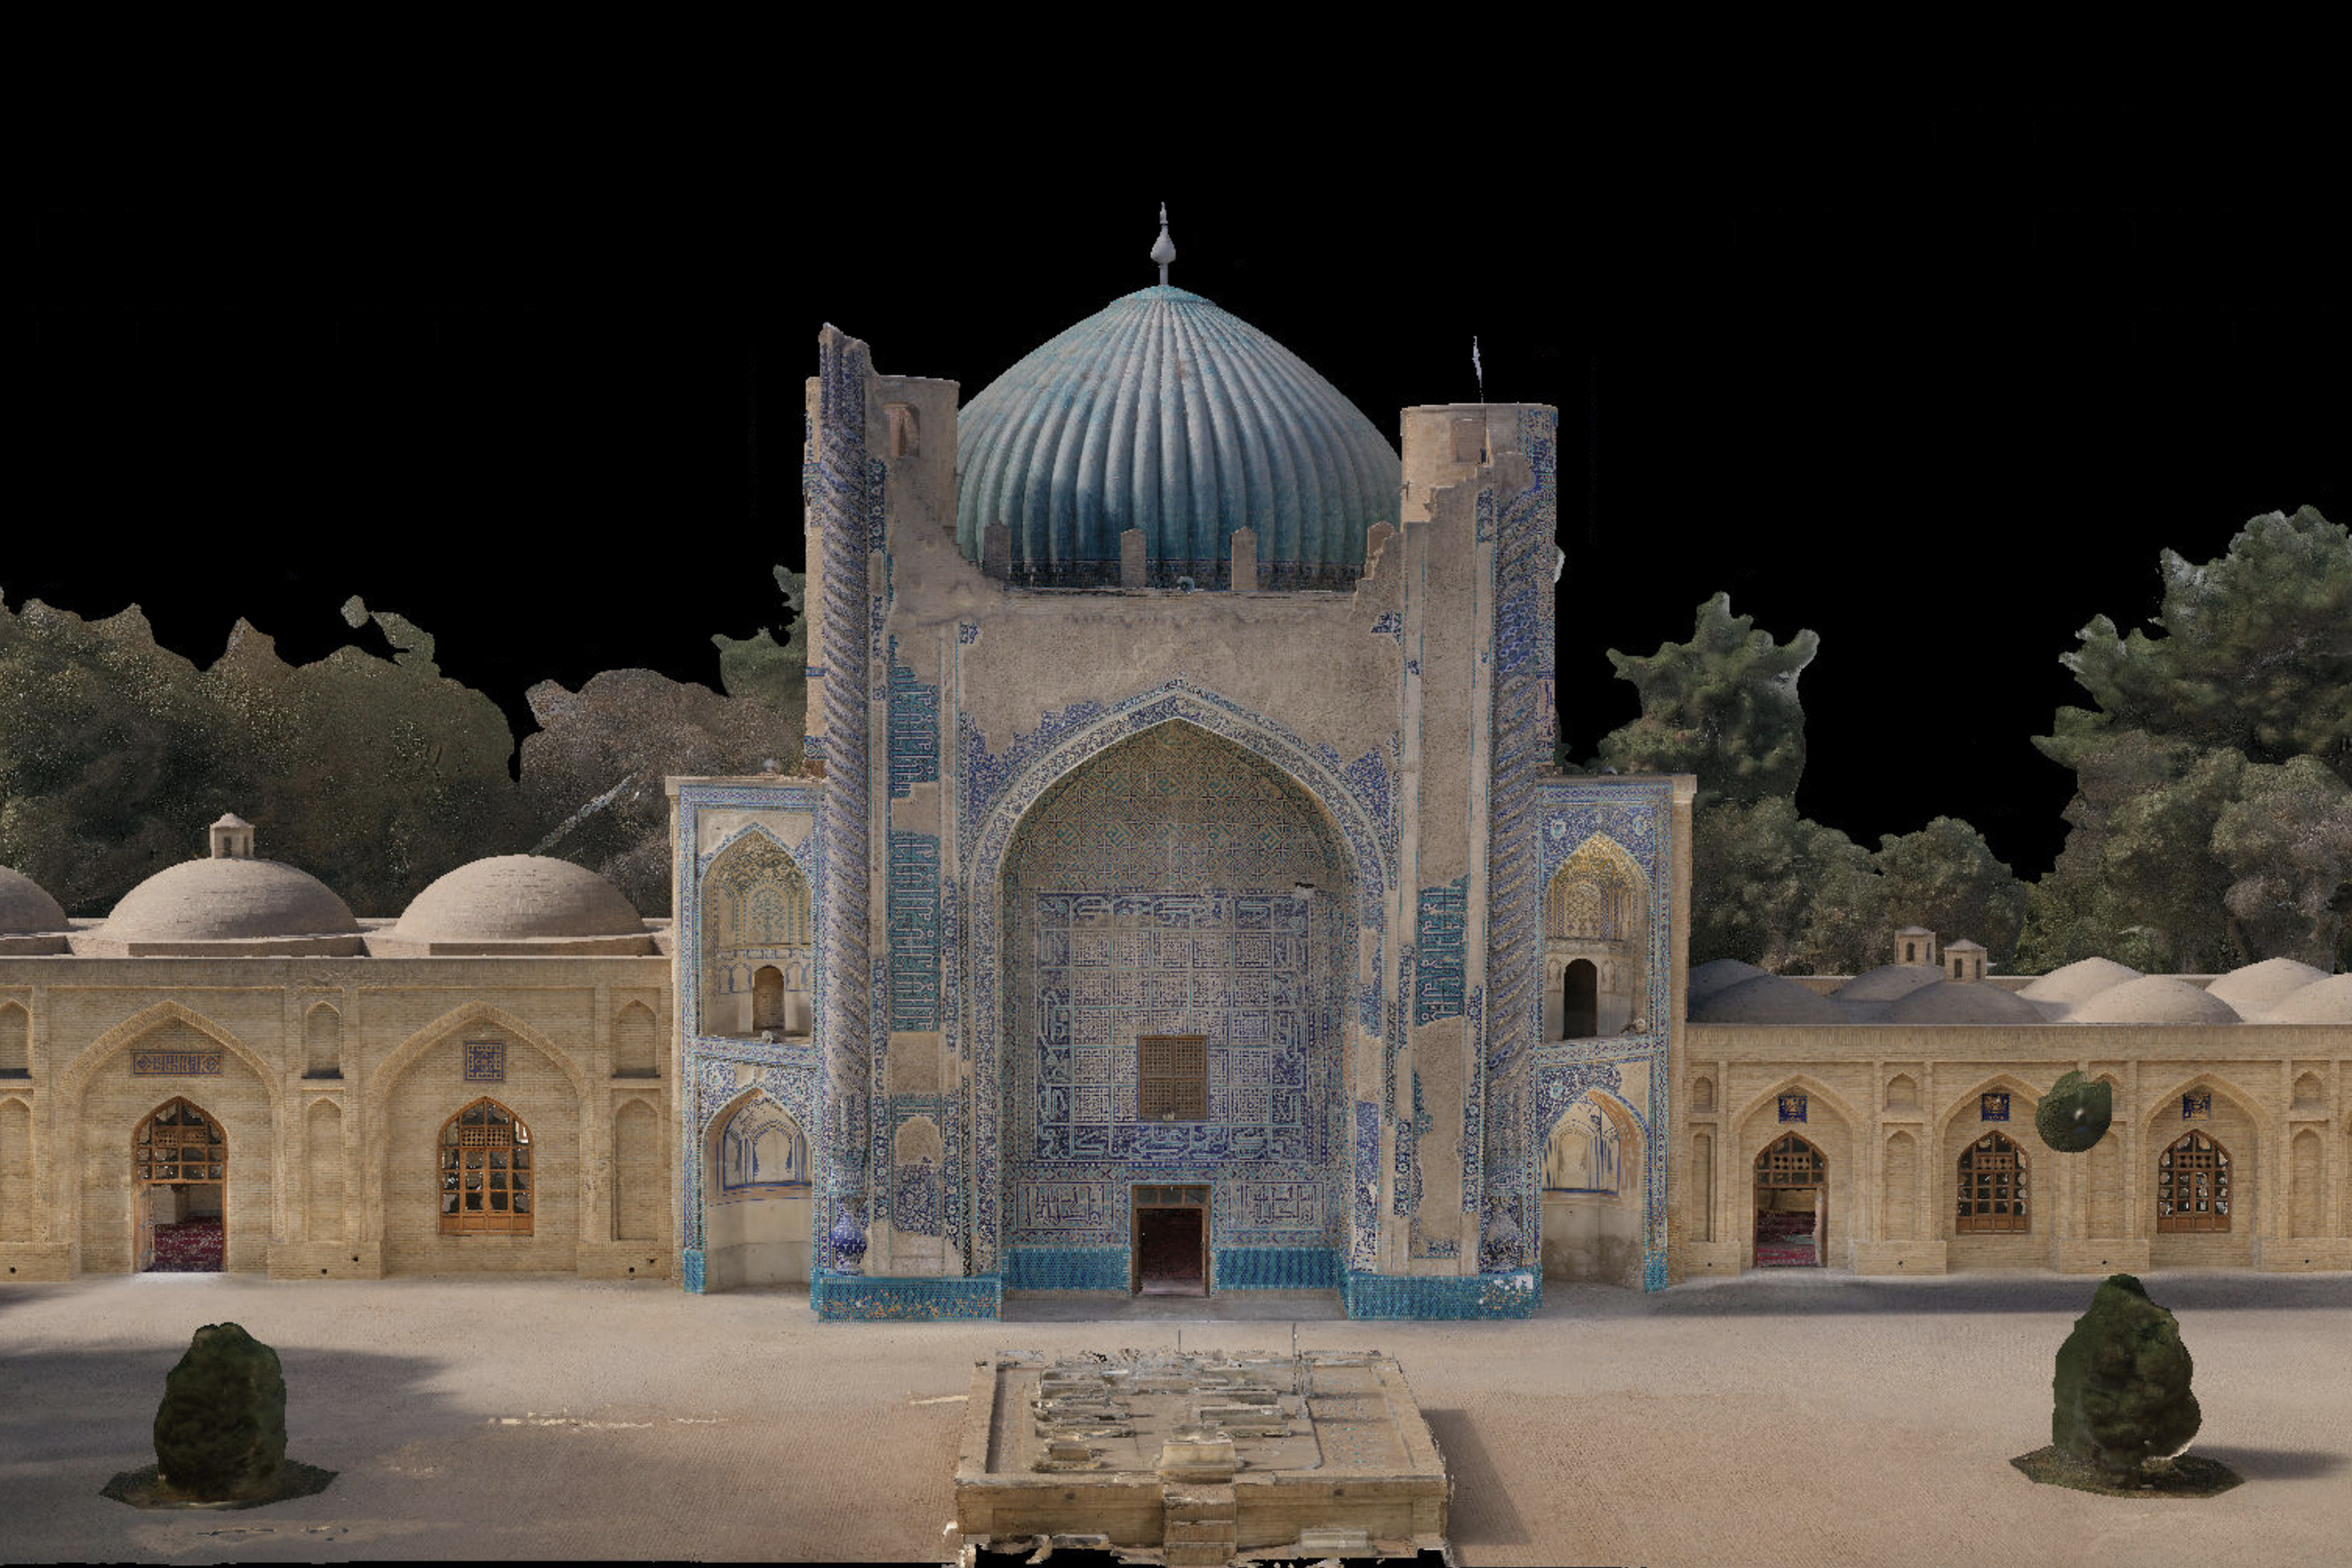 A digital rendering of the Green Mosque in Balkh, Afghanistan, a 16th Century building. MIT’s “Ways of Seeing” project, directed by Fotini Christia, a professor, is a historic preservation effort recording architecture through digital imaging, Extended Reality techniques, and hand-drawn architectural renderings. A group on the ground first took thousands of on-site photos, many of which were later assembled by MIT PhD candidate Nikolaos Vlavianos into this digital image. The project will be accessible through the MIT Libraries by the end of June 2023.